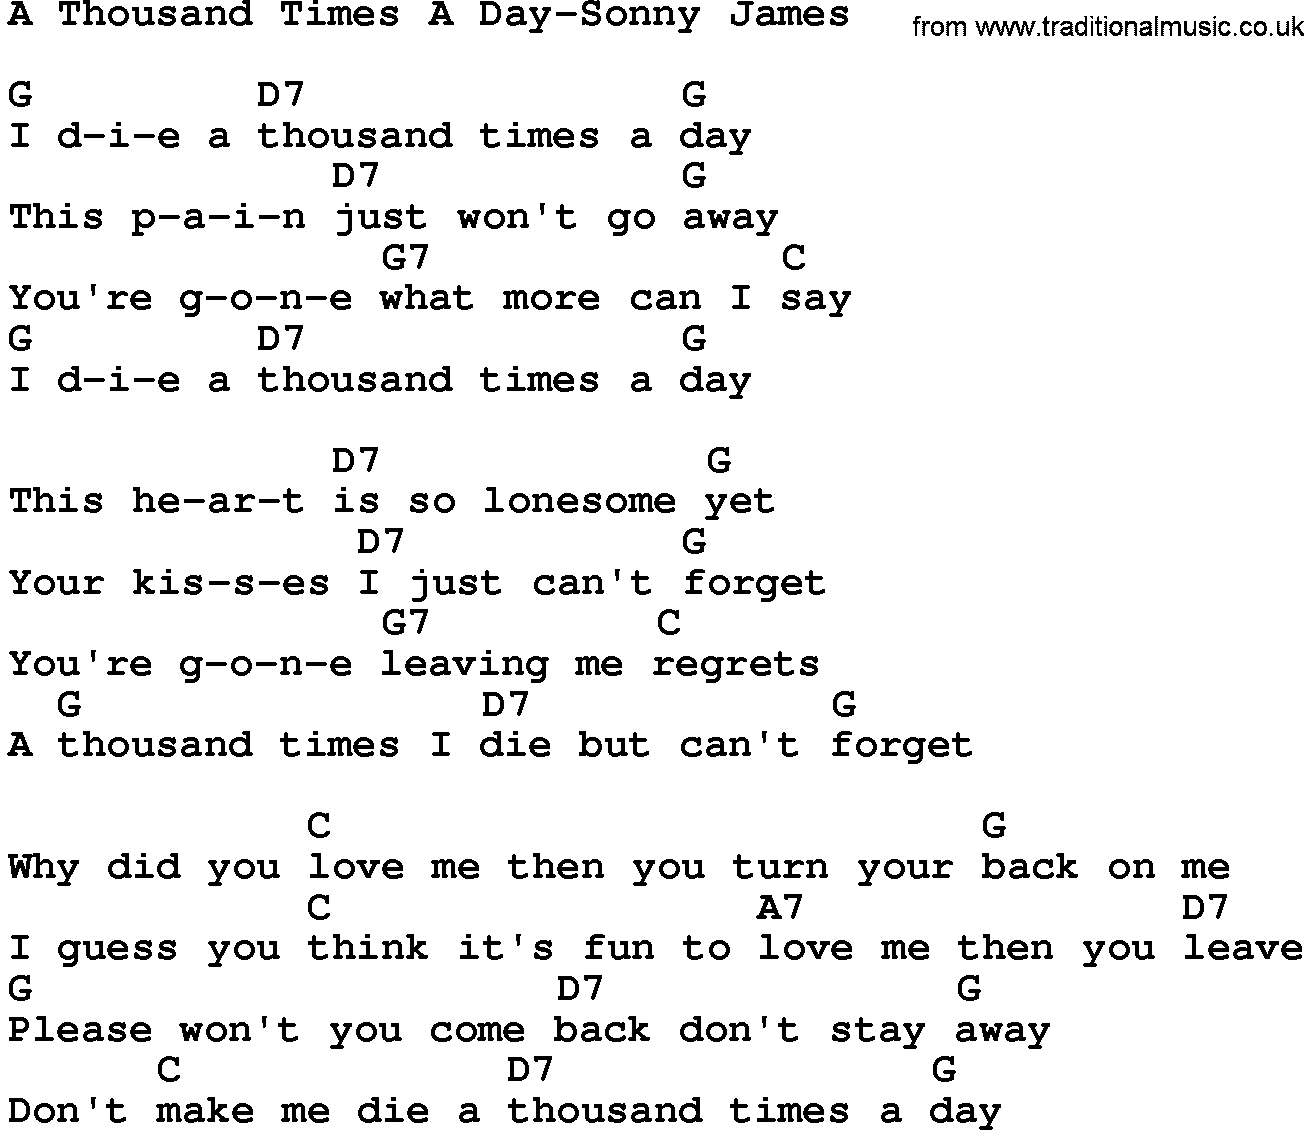 Country music song: A Thousand Times A Day-Sonny James lyrics and chords